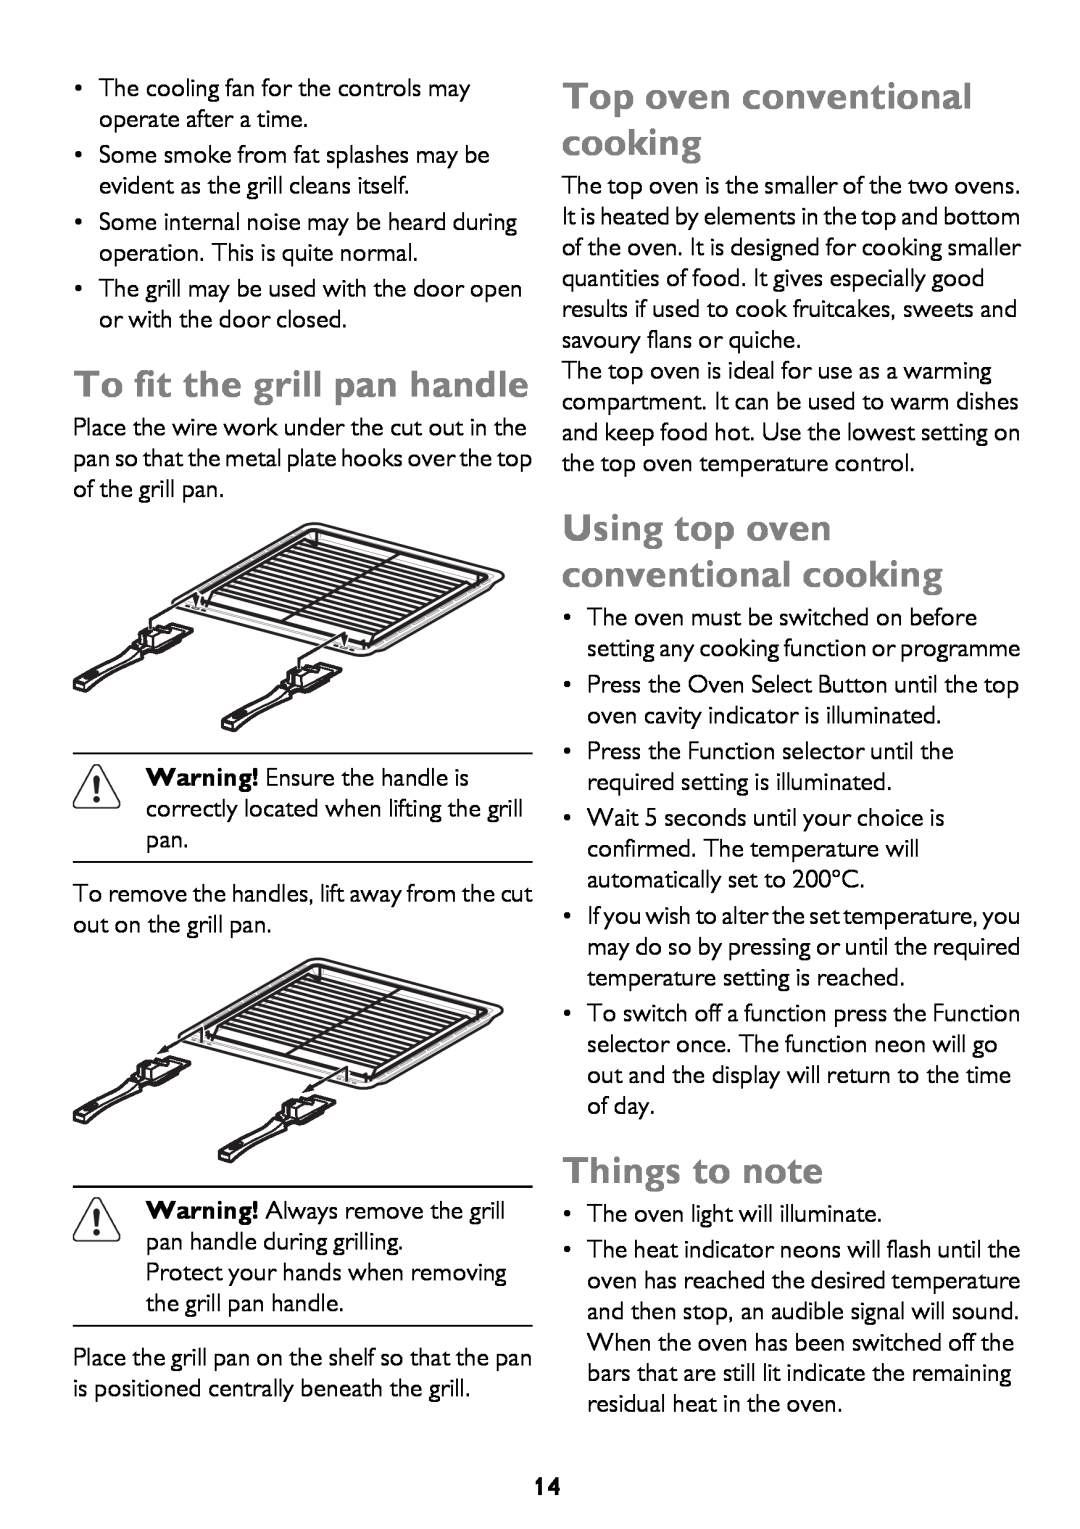 John Lewis JLBIDO911 To fit the grill pan handle, Top oven conventional cooking, Using top oven conventional cooking 